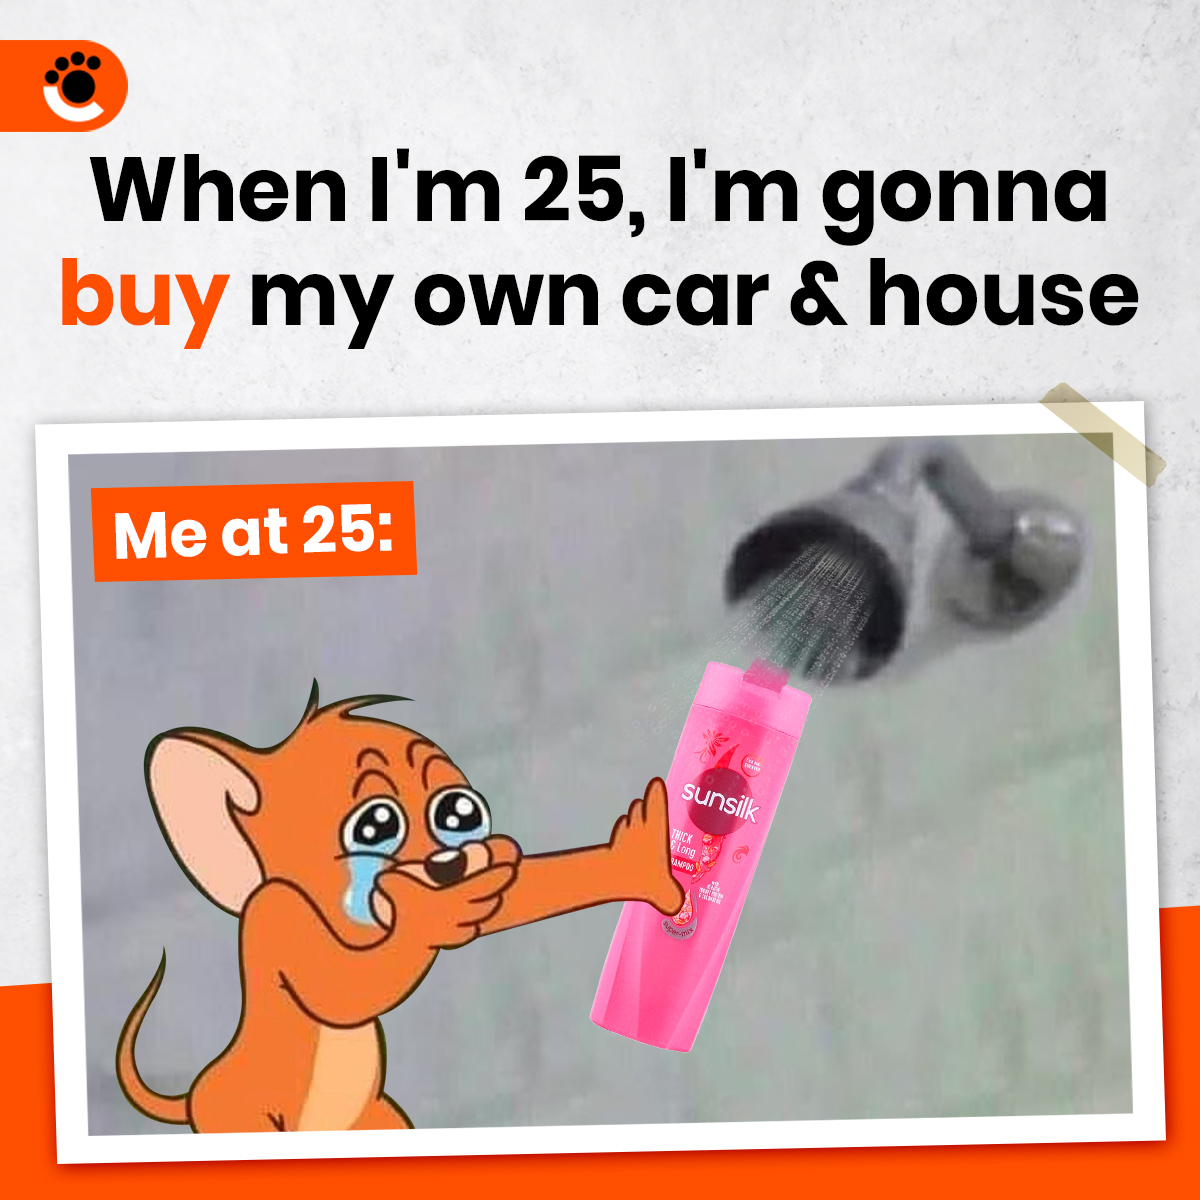 What will you do at 25? 🤔 🤔

#memes #memelord #memefunny #memesdaily #fun #funny #funtimes #funfacts #funnymemes #jerry #Sunsilk #onlinedelivery #doorstep #grocerydelivery #grocery #food #pharma #lahore #islamabad #rawalpindi #ecommerce #gamifiedecommerce #cmore #cheetay